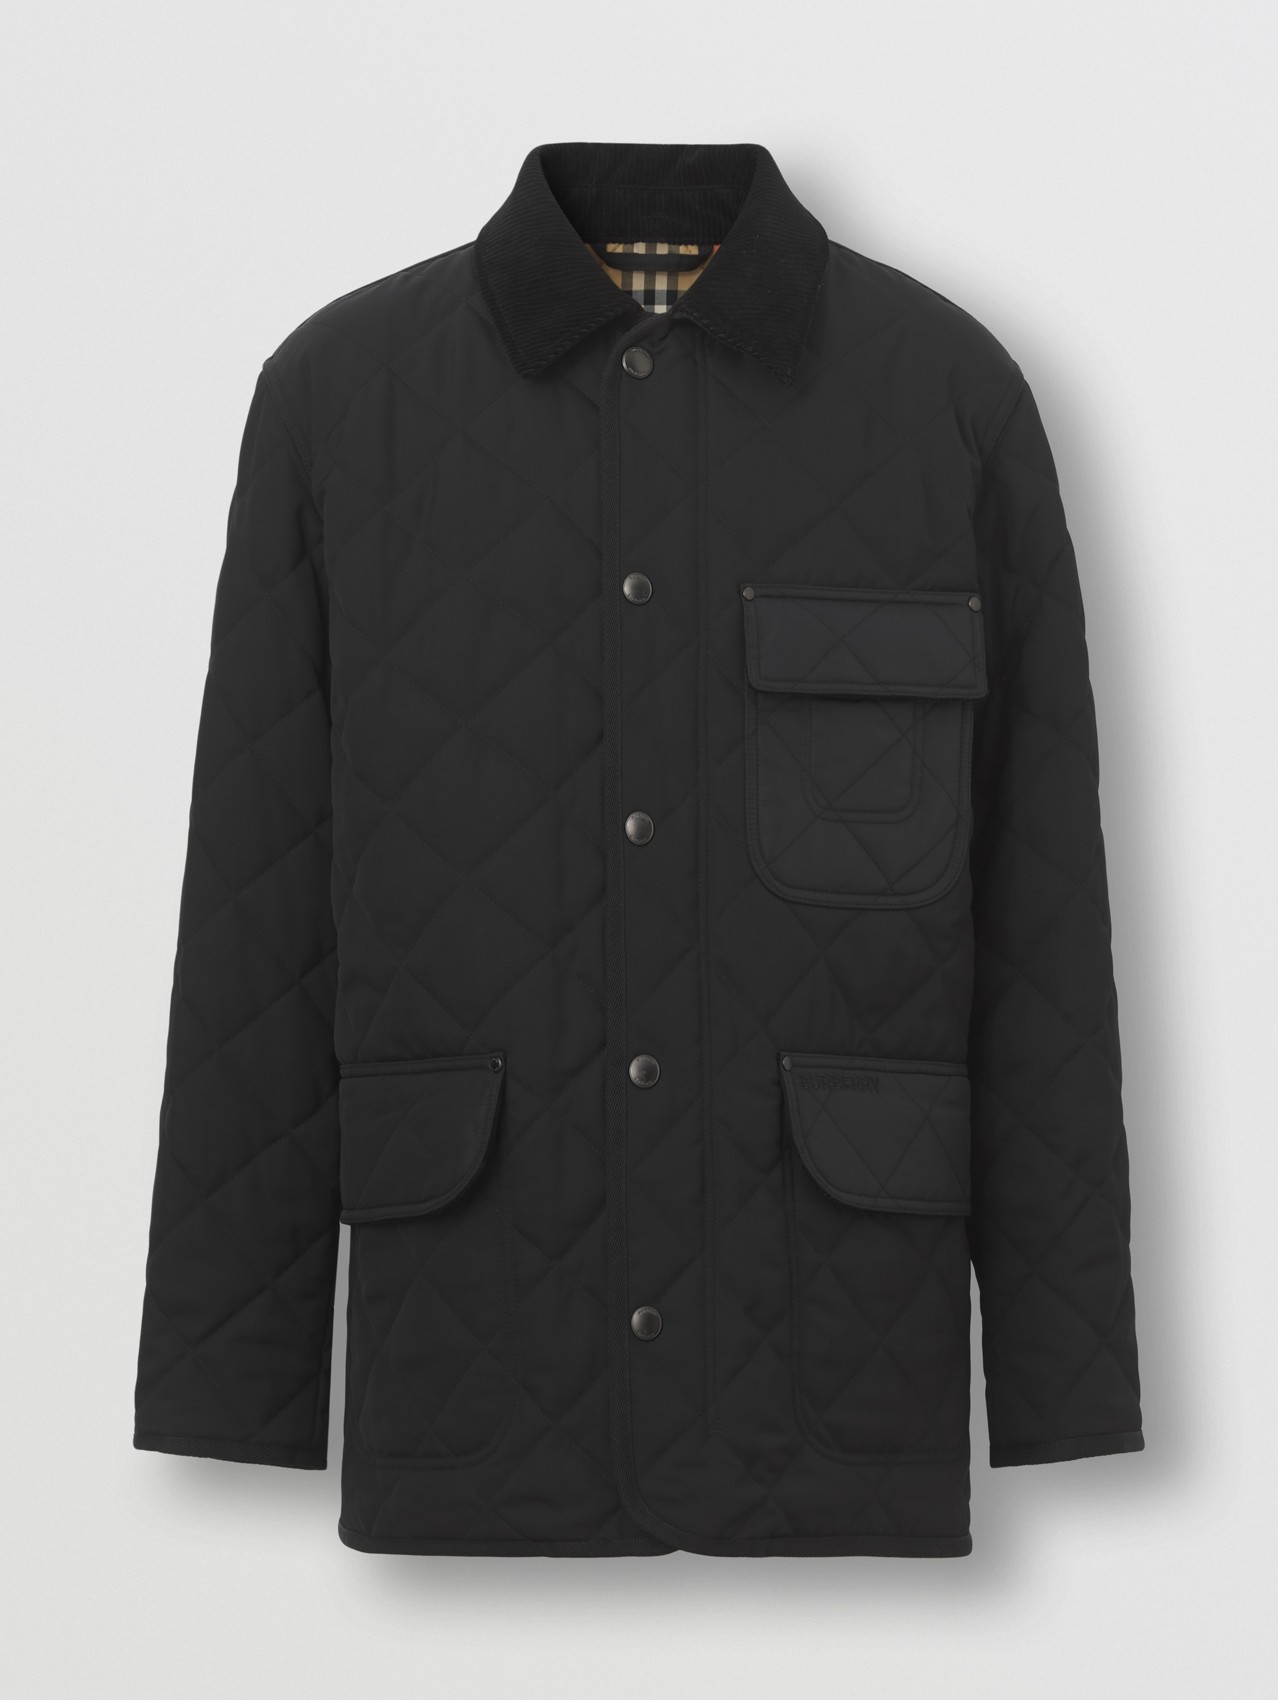 Diamond Quilted Thermoregulated Field Jacket in Black